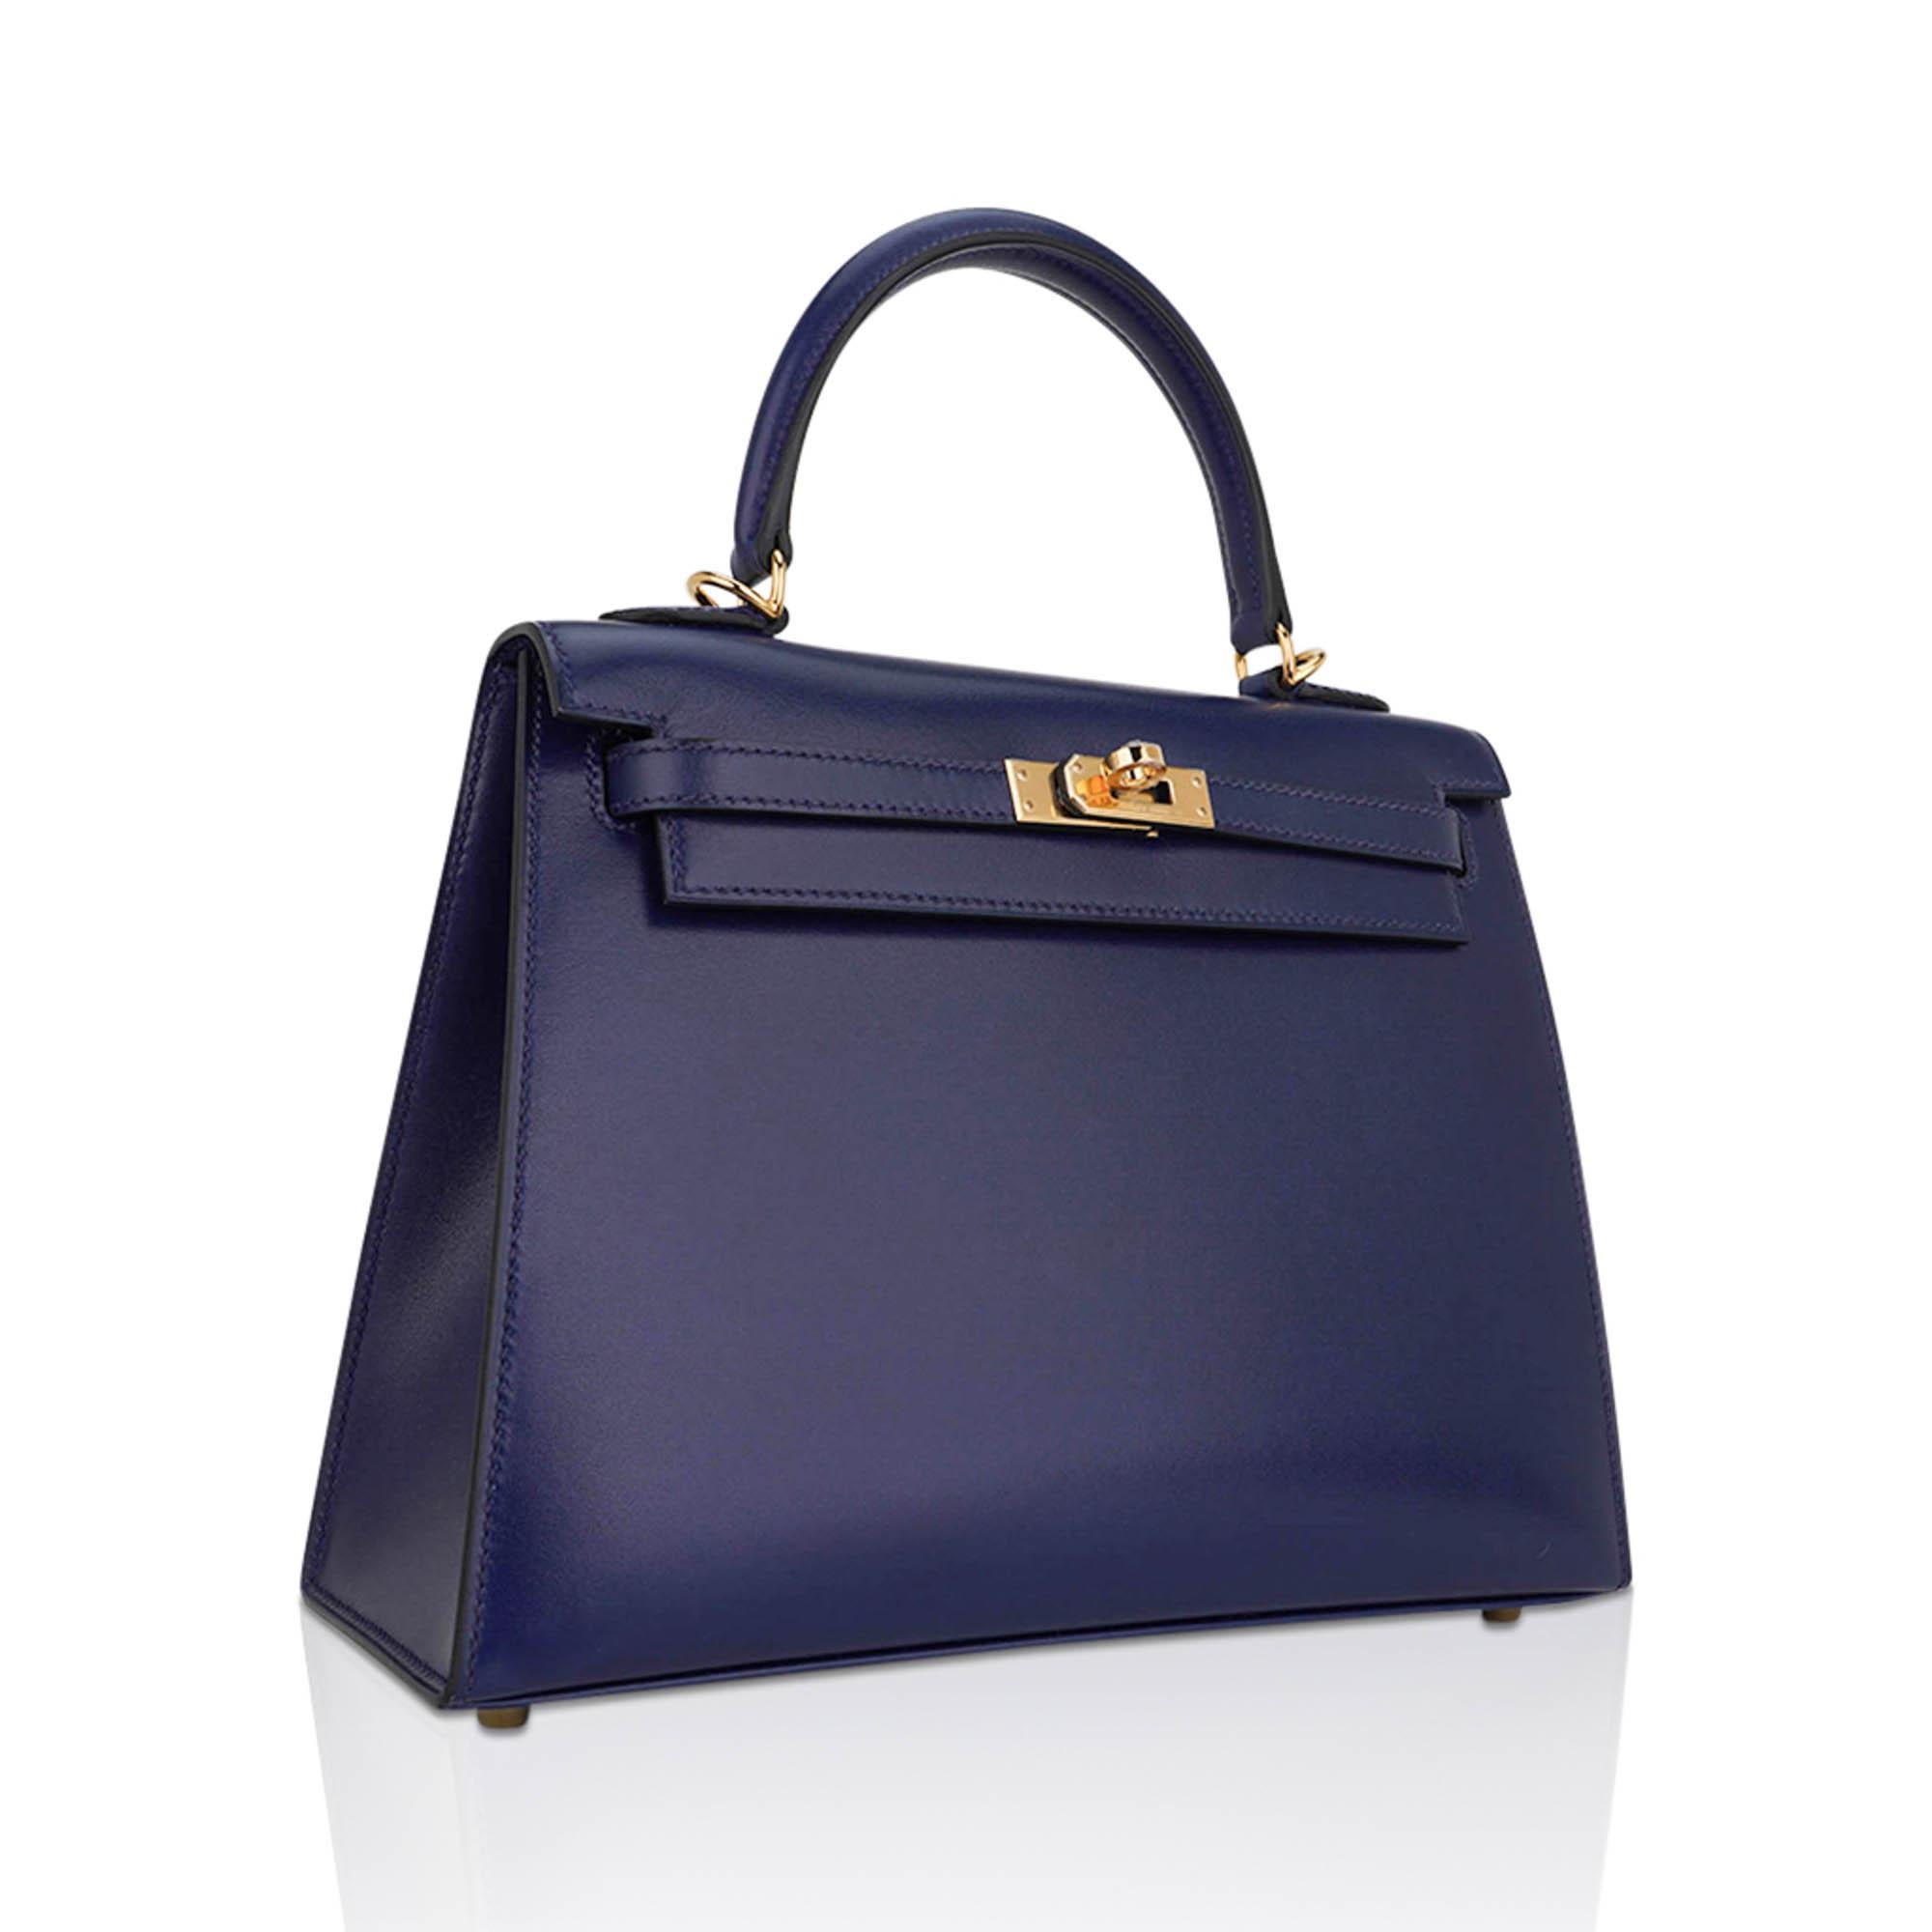 Mightychic offers an Hermes Kelly Sellier 25 bag featured in jewel toned Blue Sapphire Box leather.
Considered to be of the most collectible heritage leathers from Hermes, this timeless beauty exudes chic style.
Bleu Saphir is saturated and can